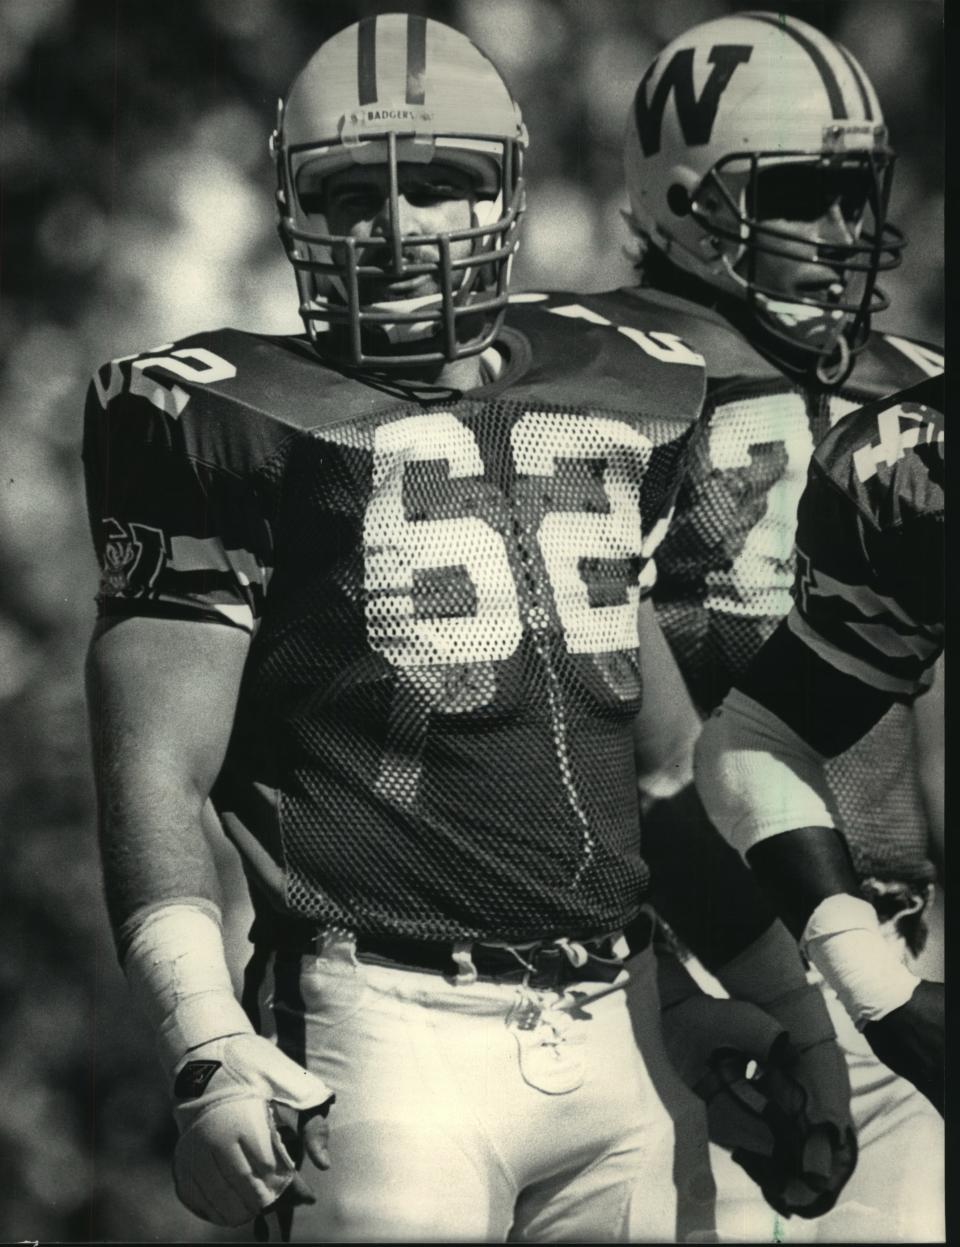 Paul Gruber played with the Badgers in 1987 and was taken with the fourth overall pick in the 1988 NFL Draft by Tampa Bay.